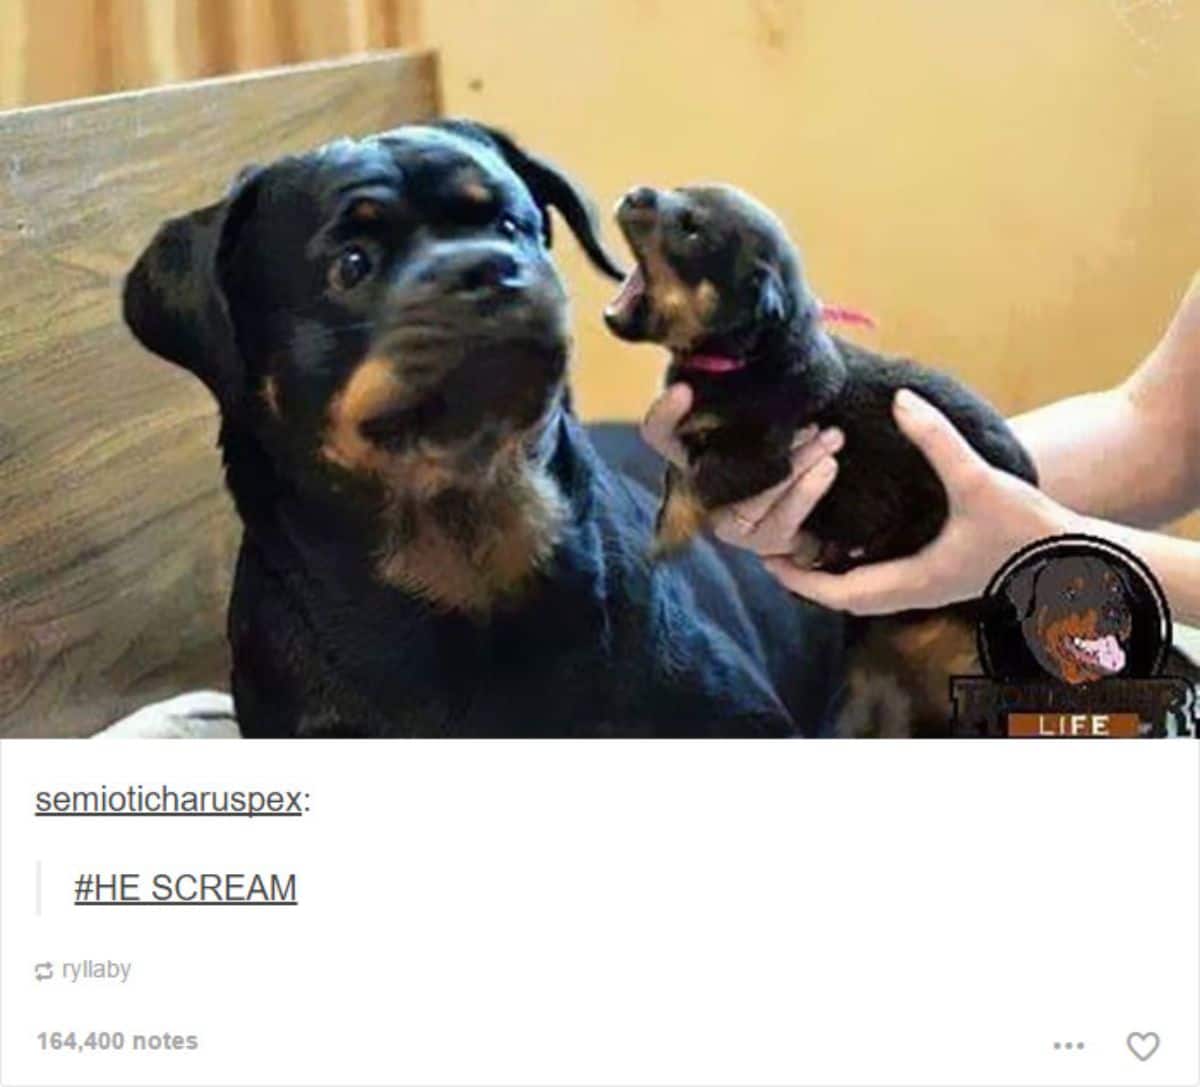 rottweiler puppy held by someone with the mouth wide open near an adult rottweiler who looks startled